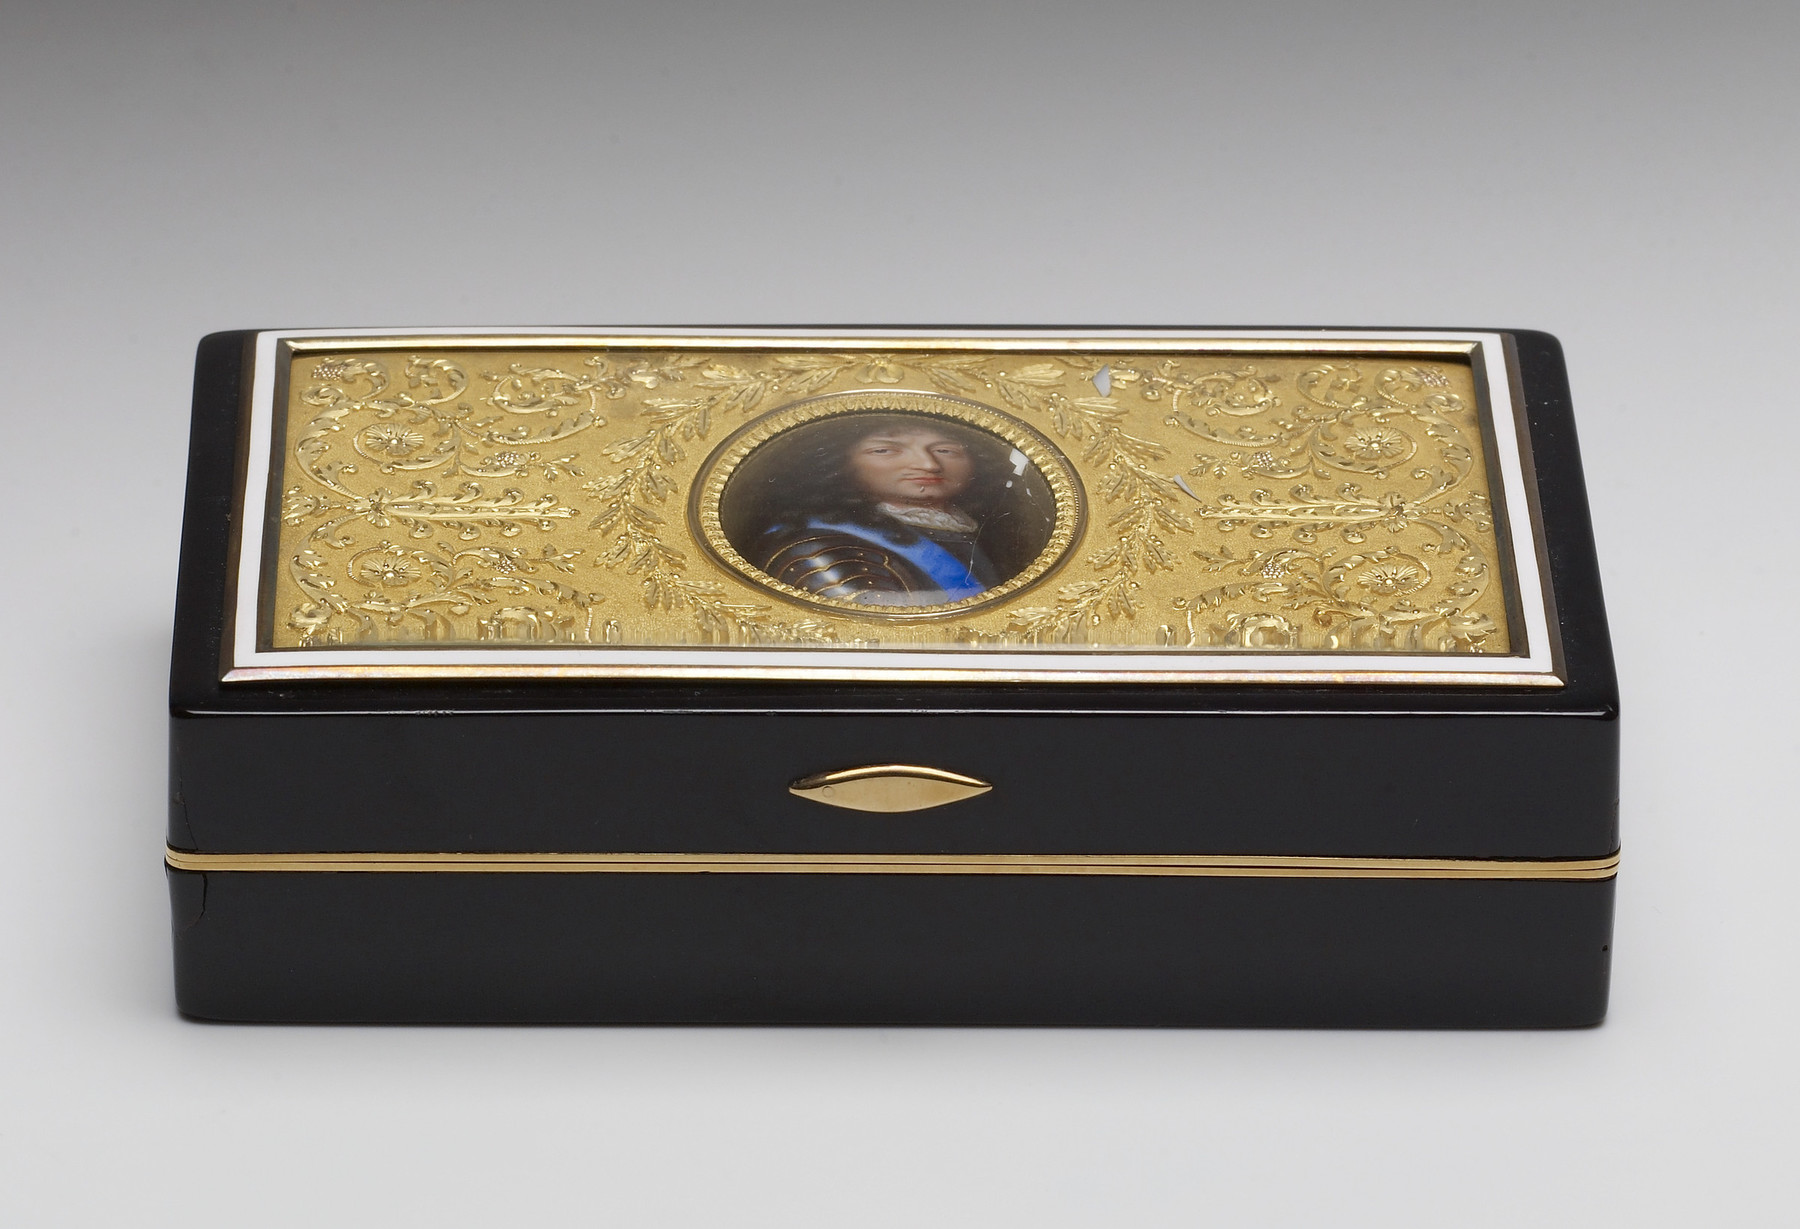 Image for Snuffbox with Portrait of Louis XIV, King of France